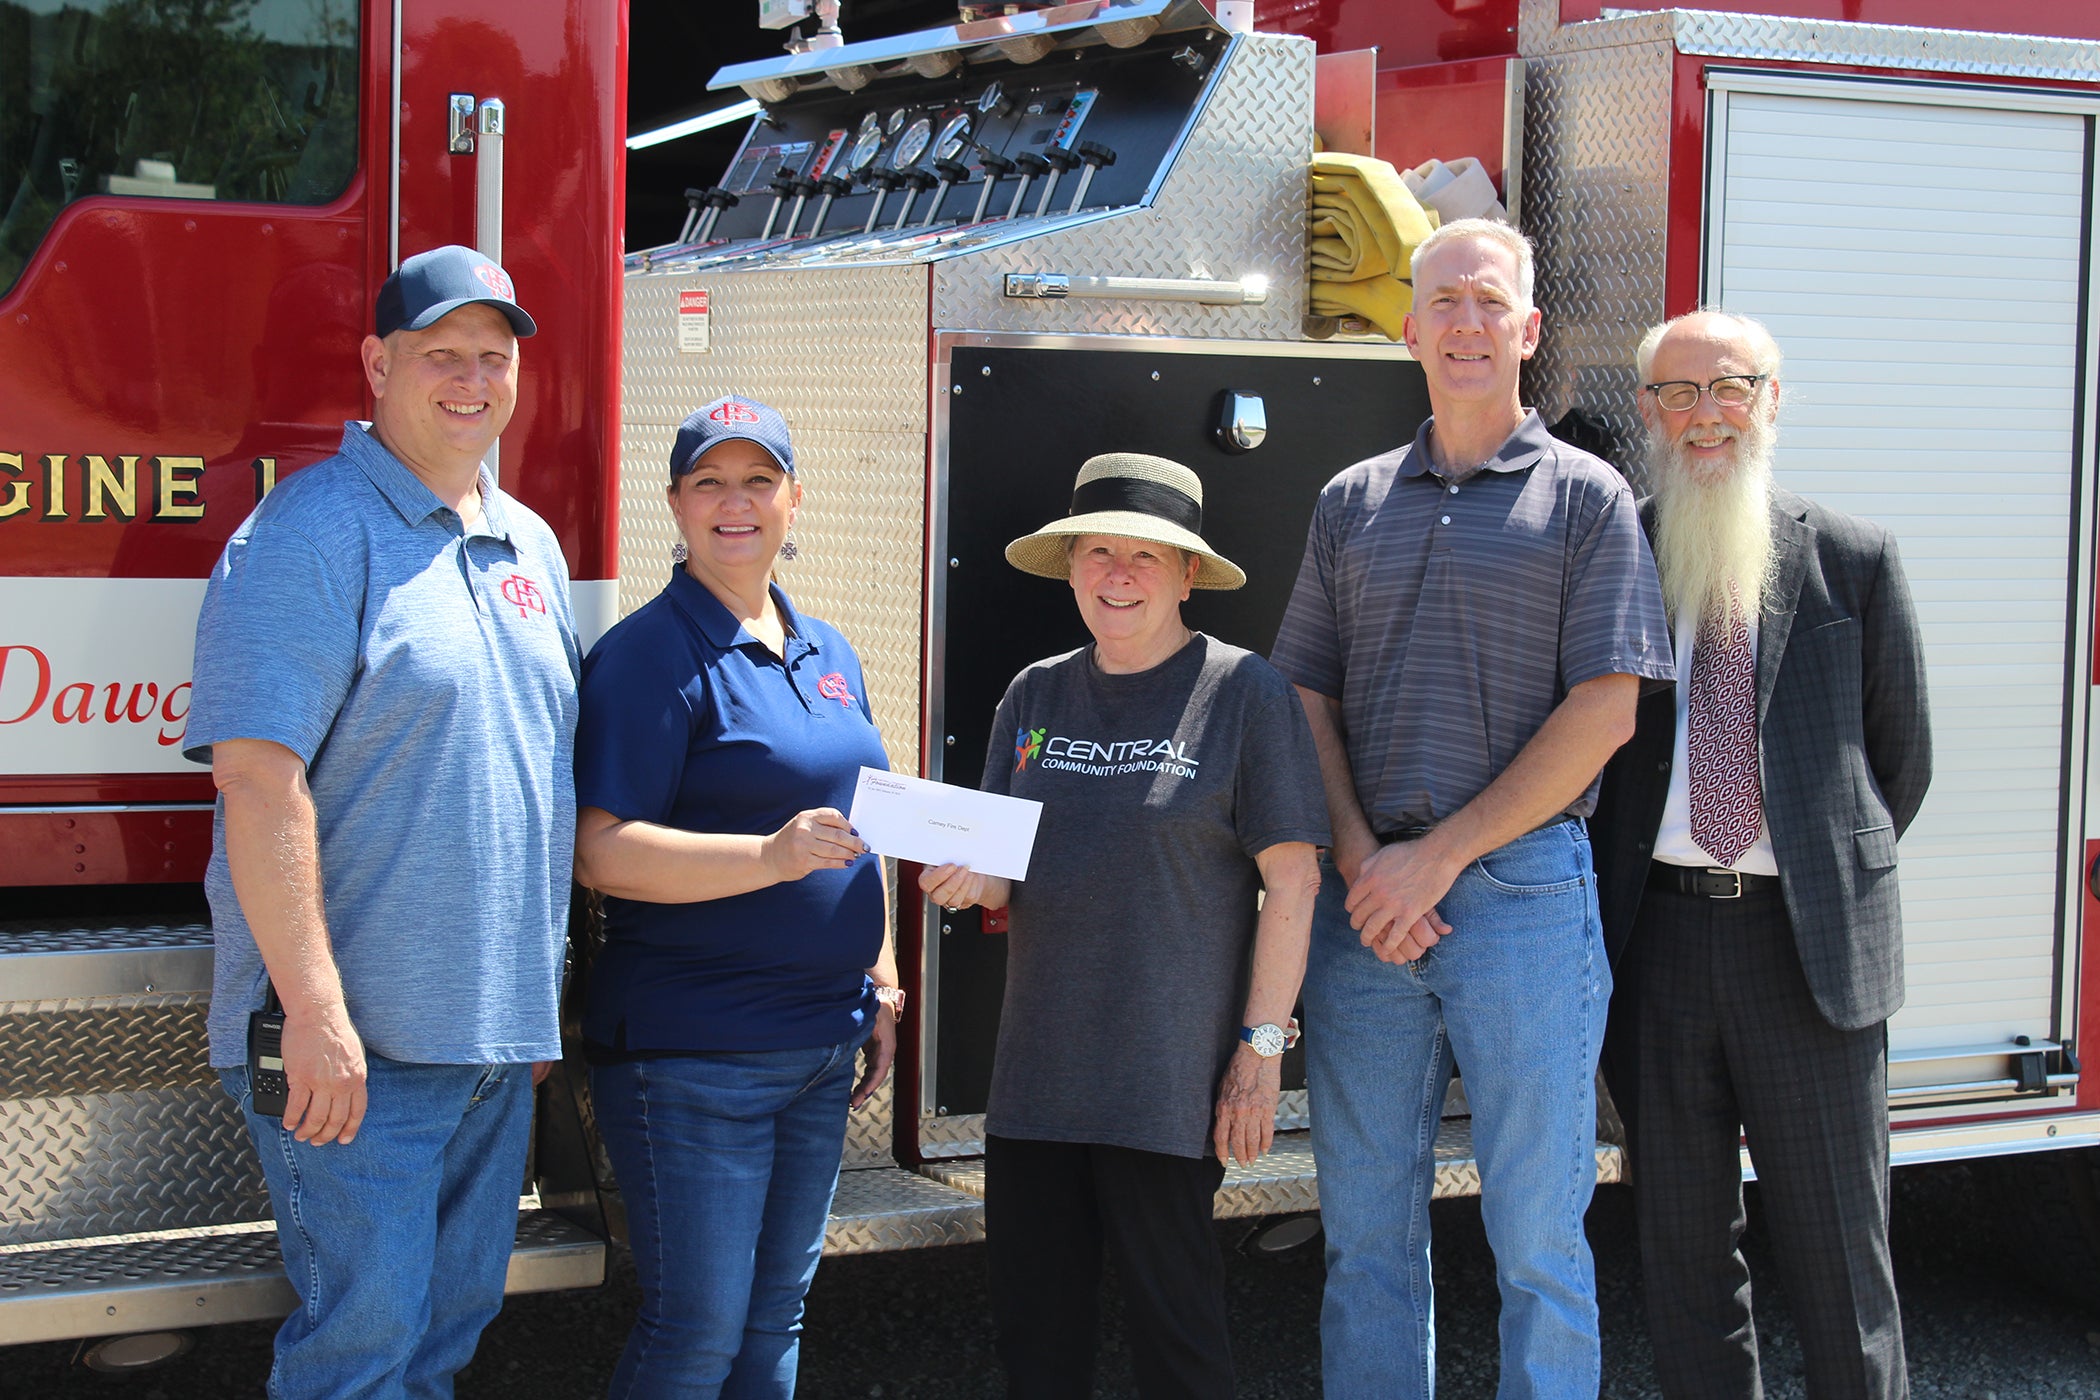 (From left to right) Robbie Clark, Carney fire chief; Sarah Smith, Carney firefighter; Peggy Wolfe, Central Foundation board member; Craig Wolfe, Carney vice mayor; and Stu Preston, Central district 2 trustee.